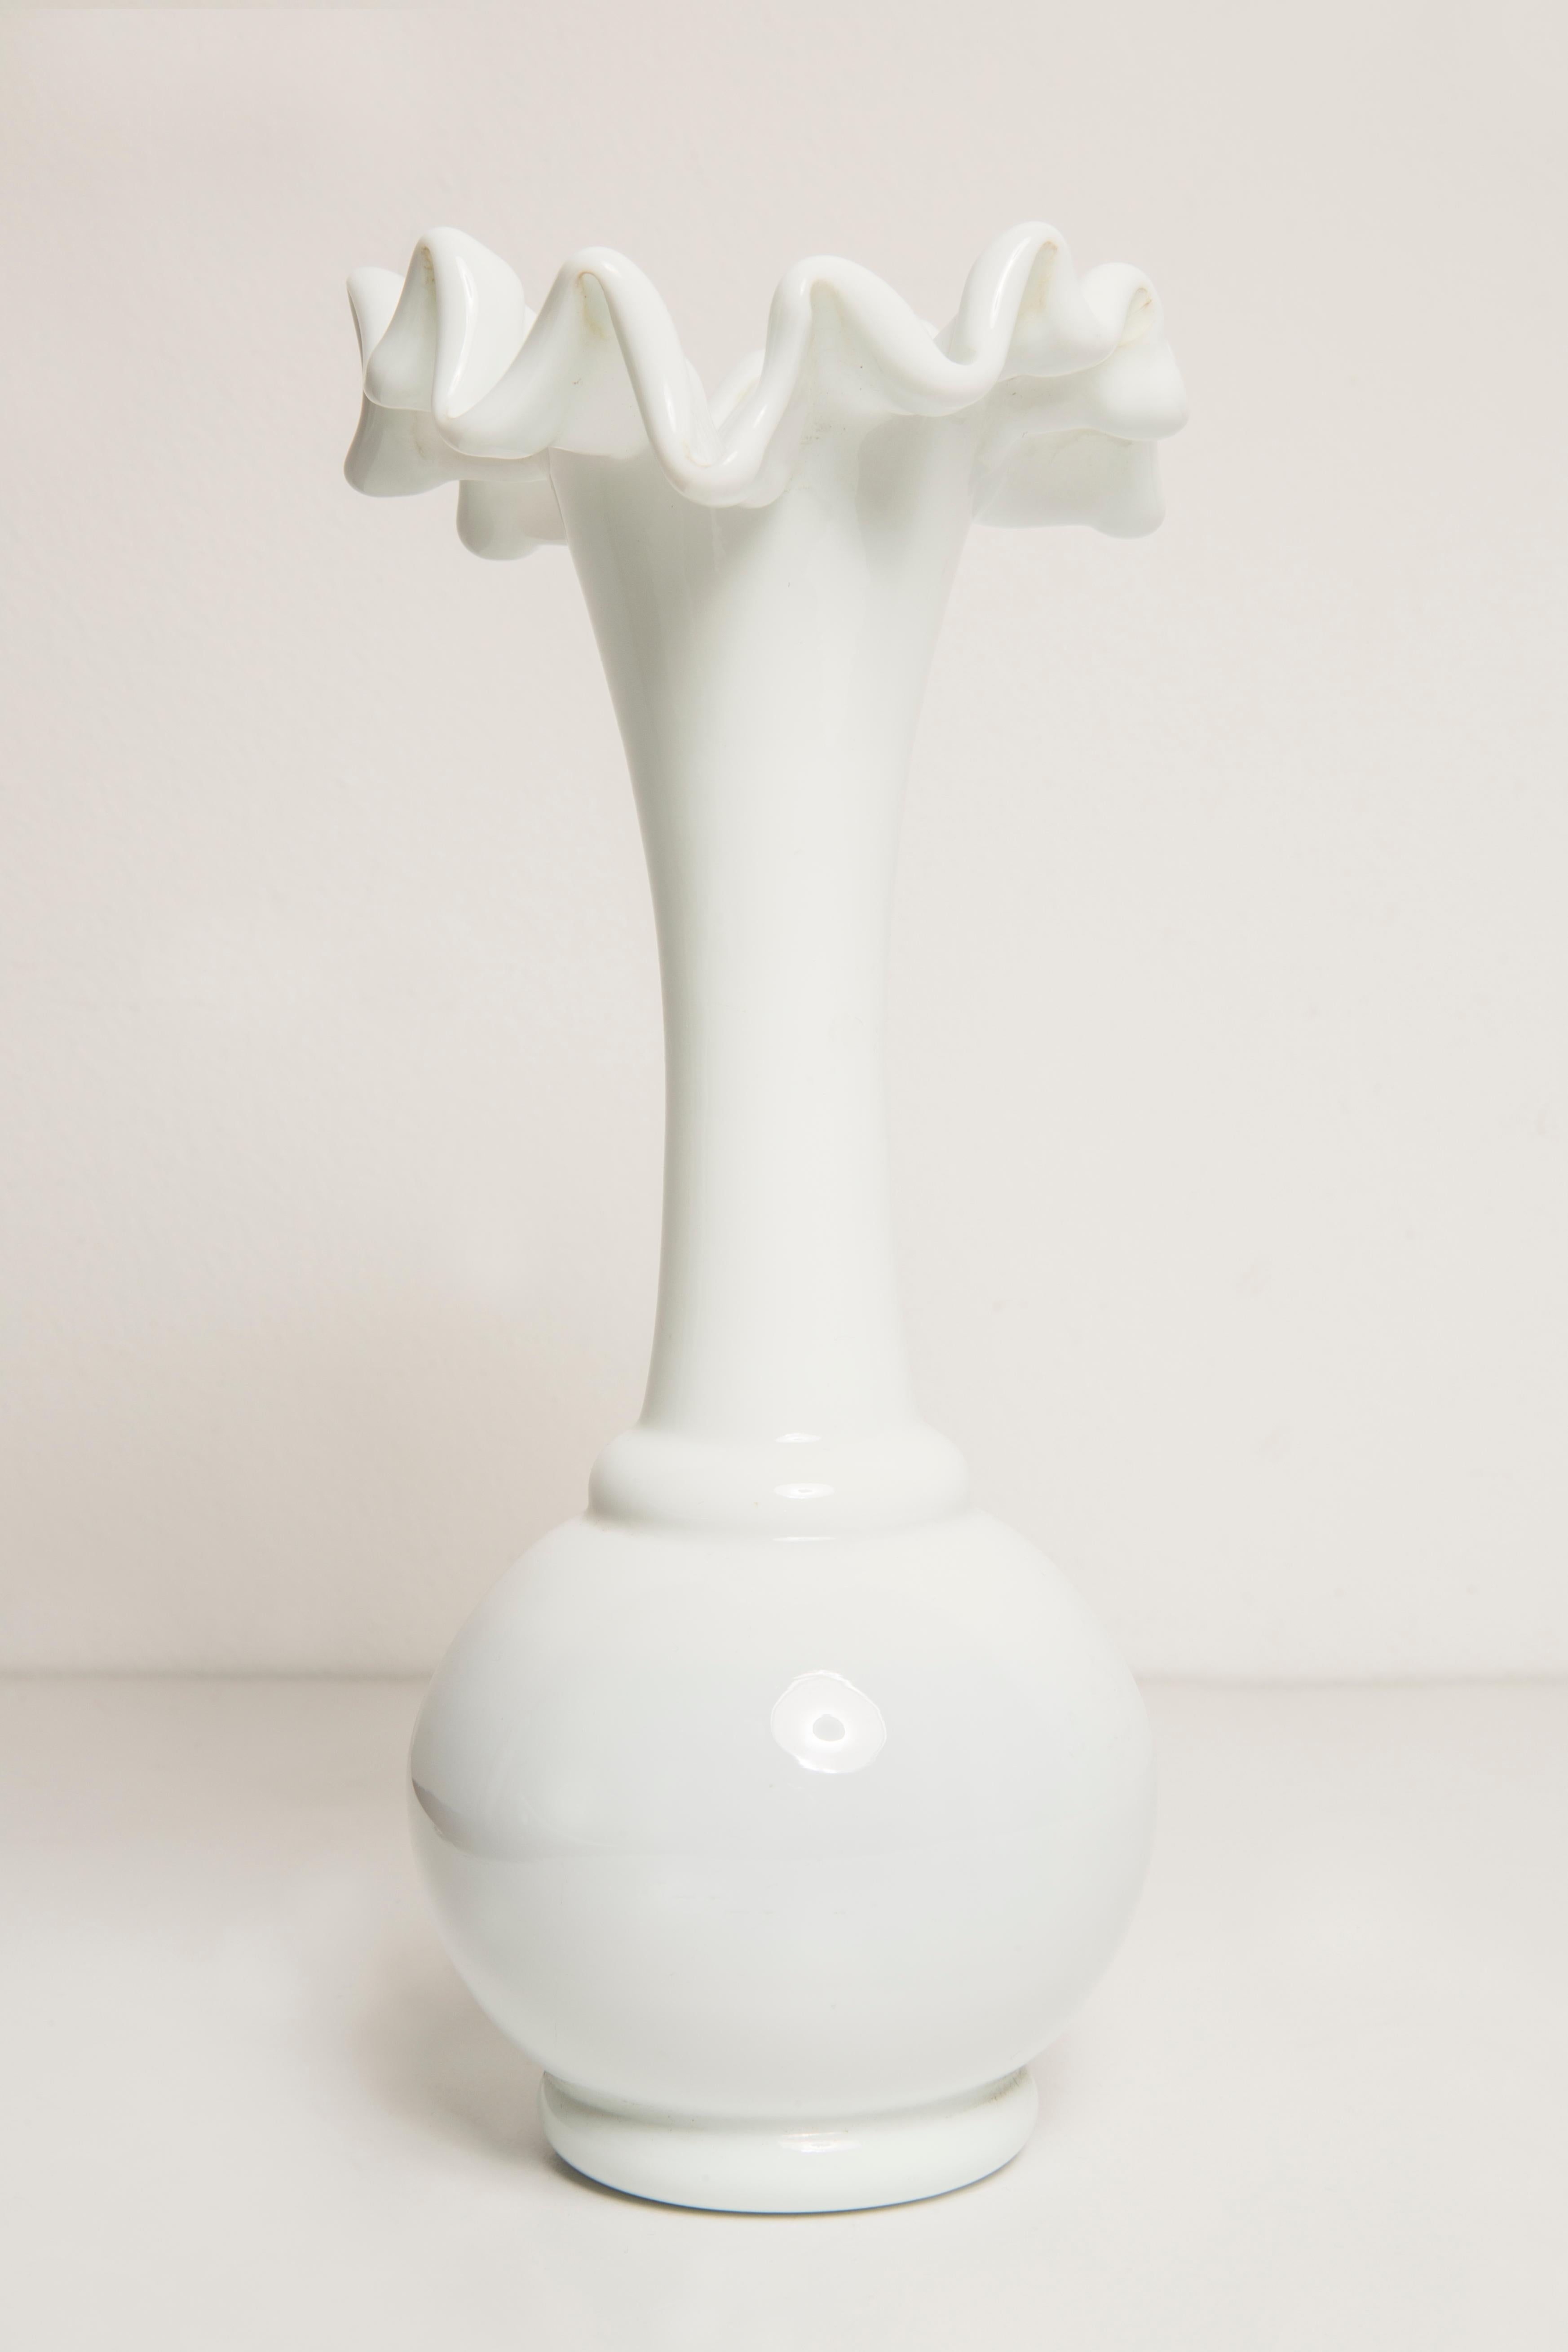 Midcentury Porcelain White Mini Vase with a Frill, Europe, 1960s For Sale 1